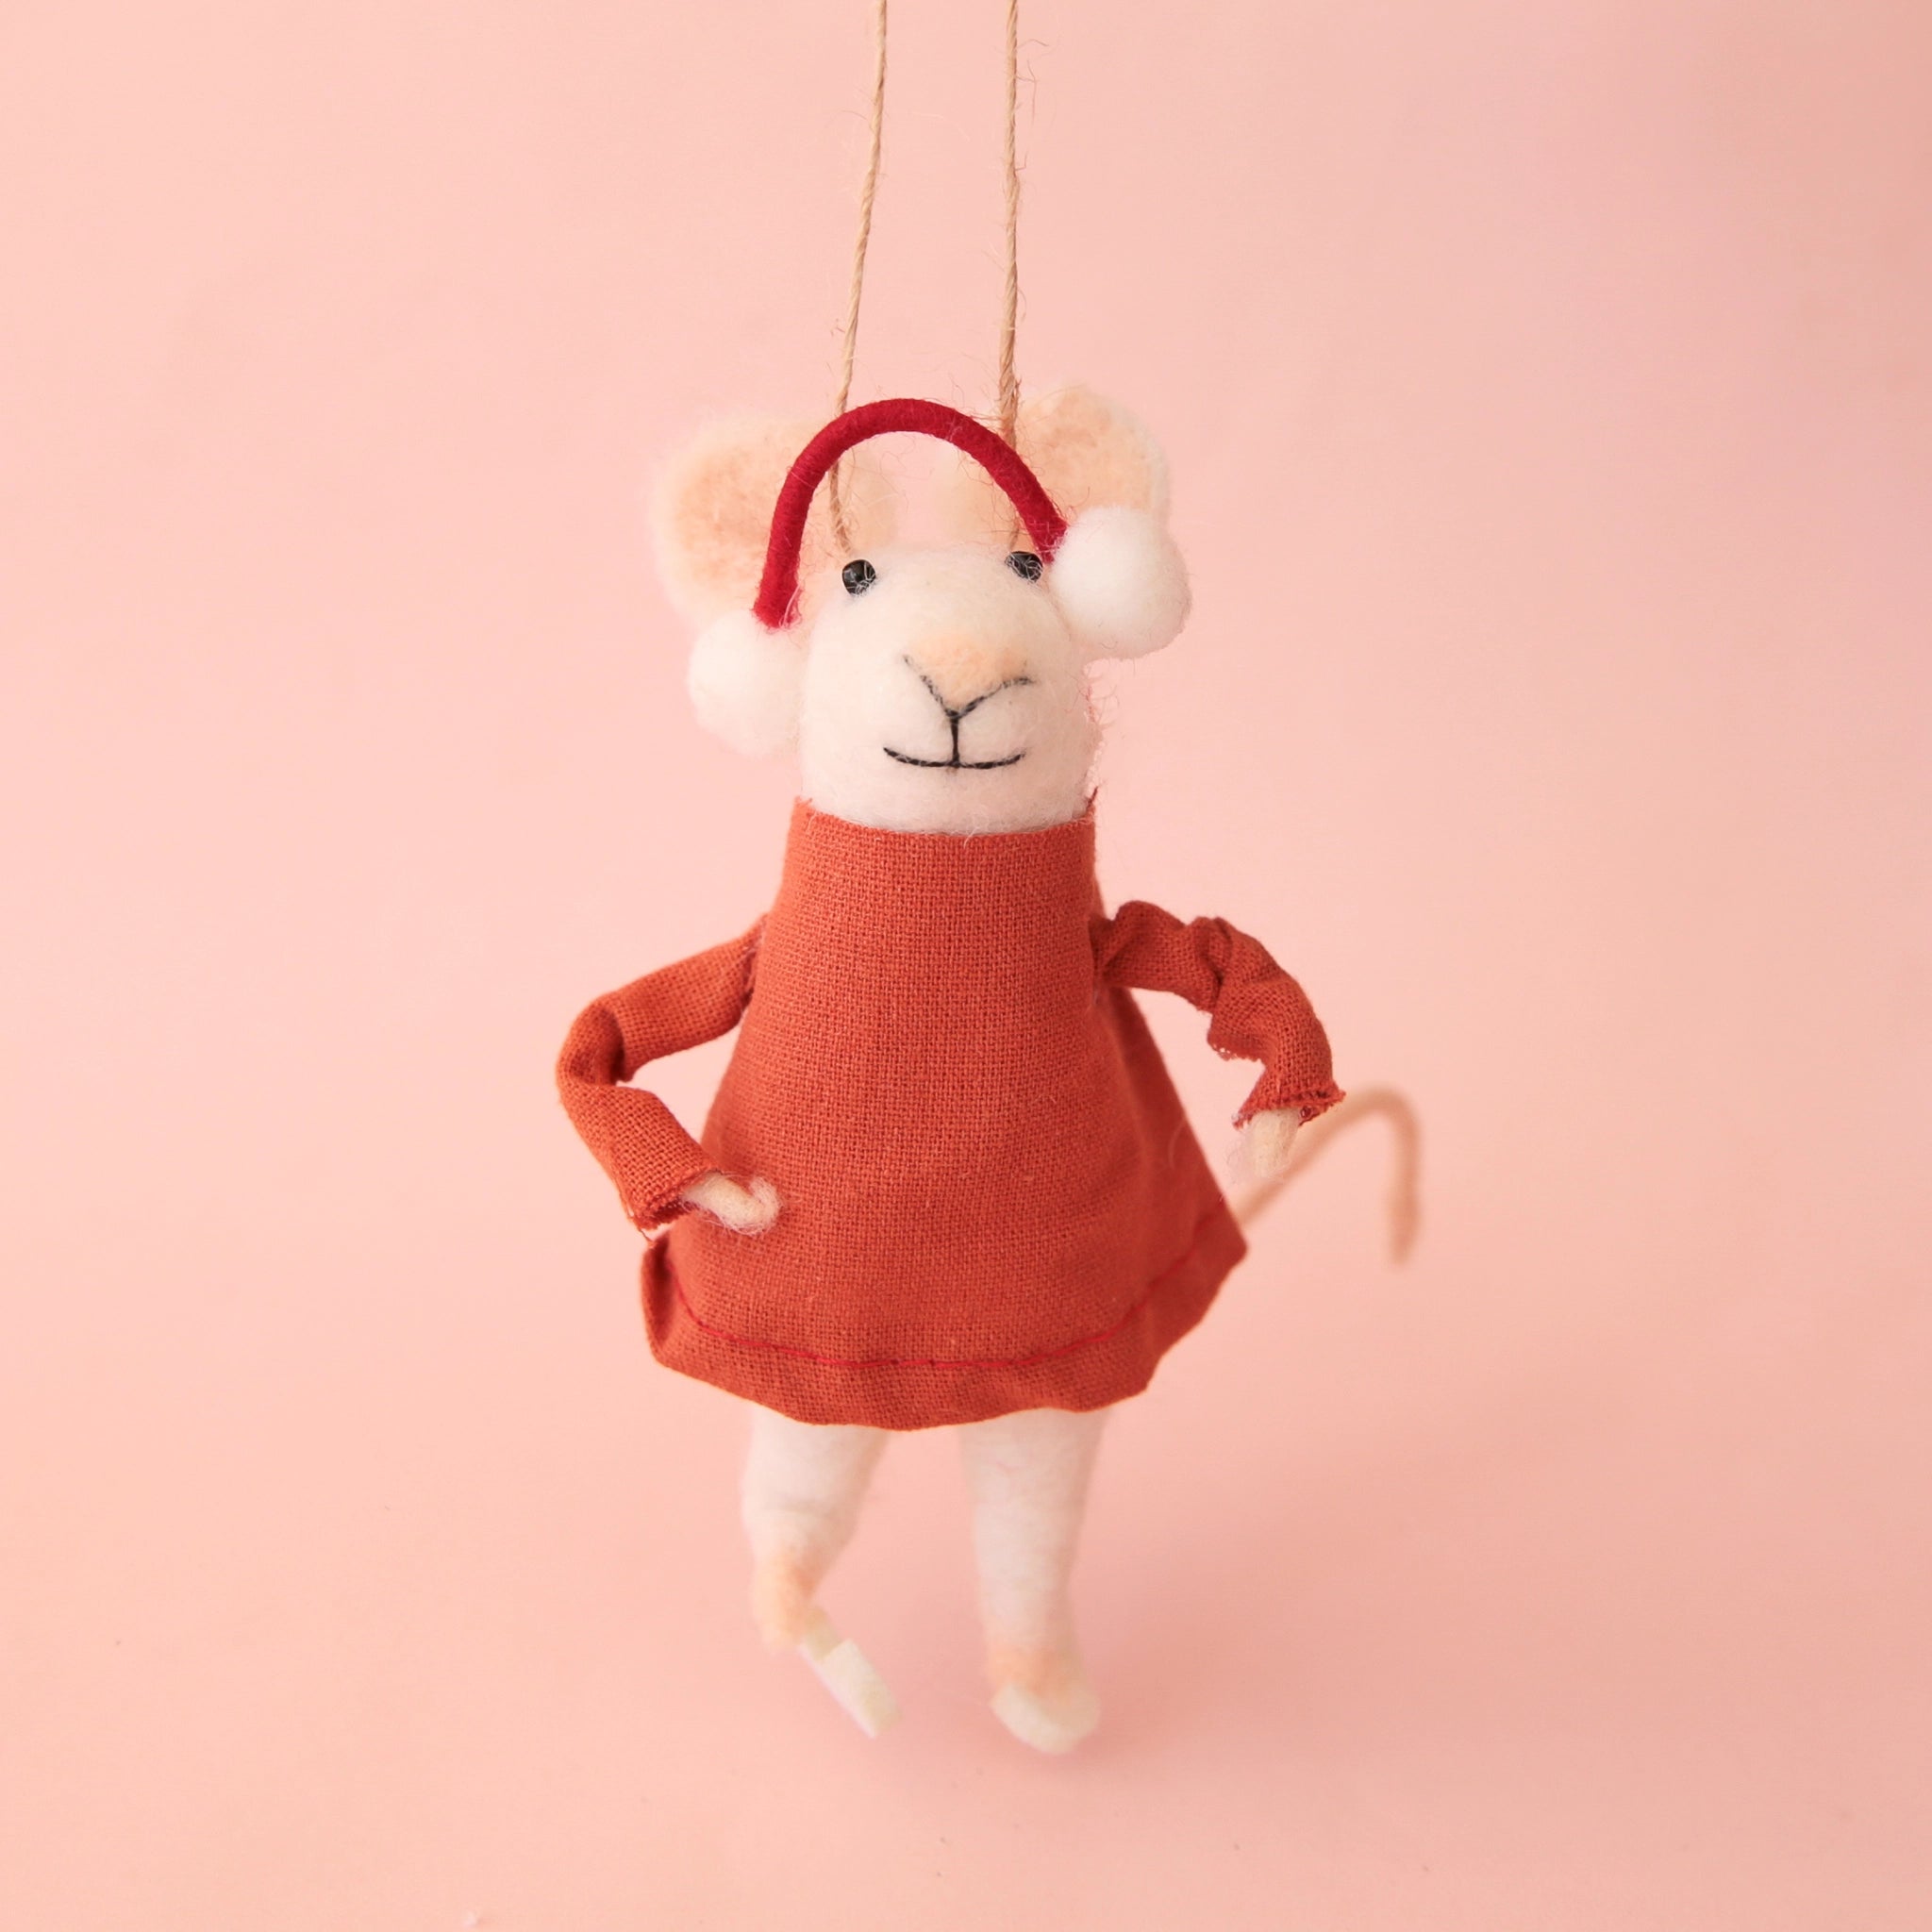 On a pink background is a white felt mouse ornament wearing a red dress and earmuffs and ice skates. 